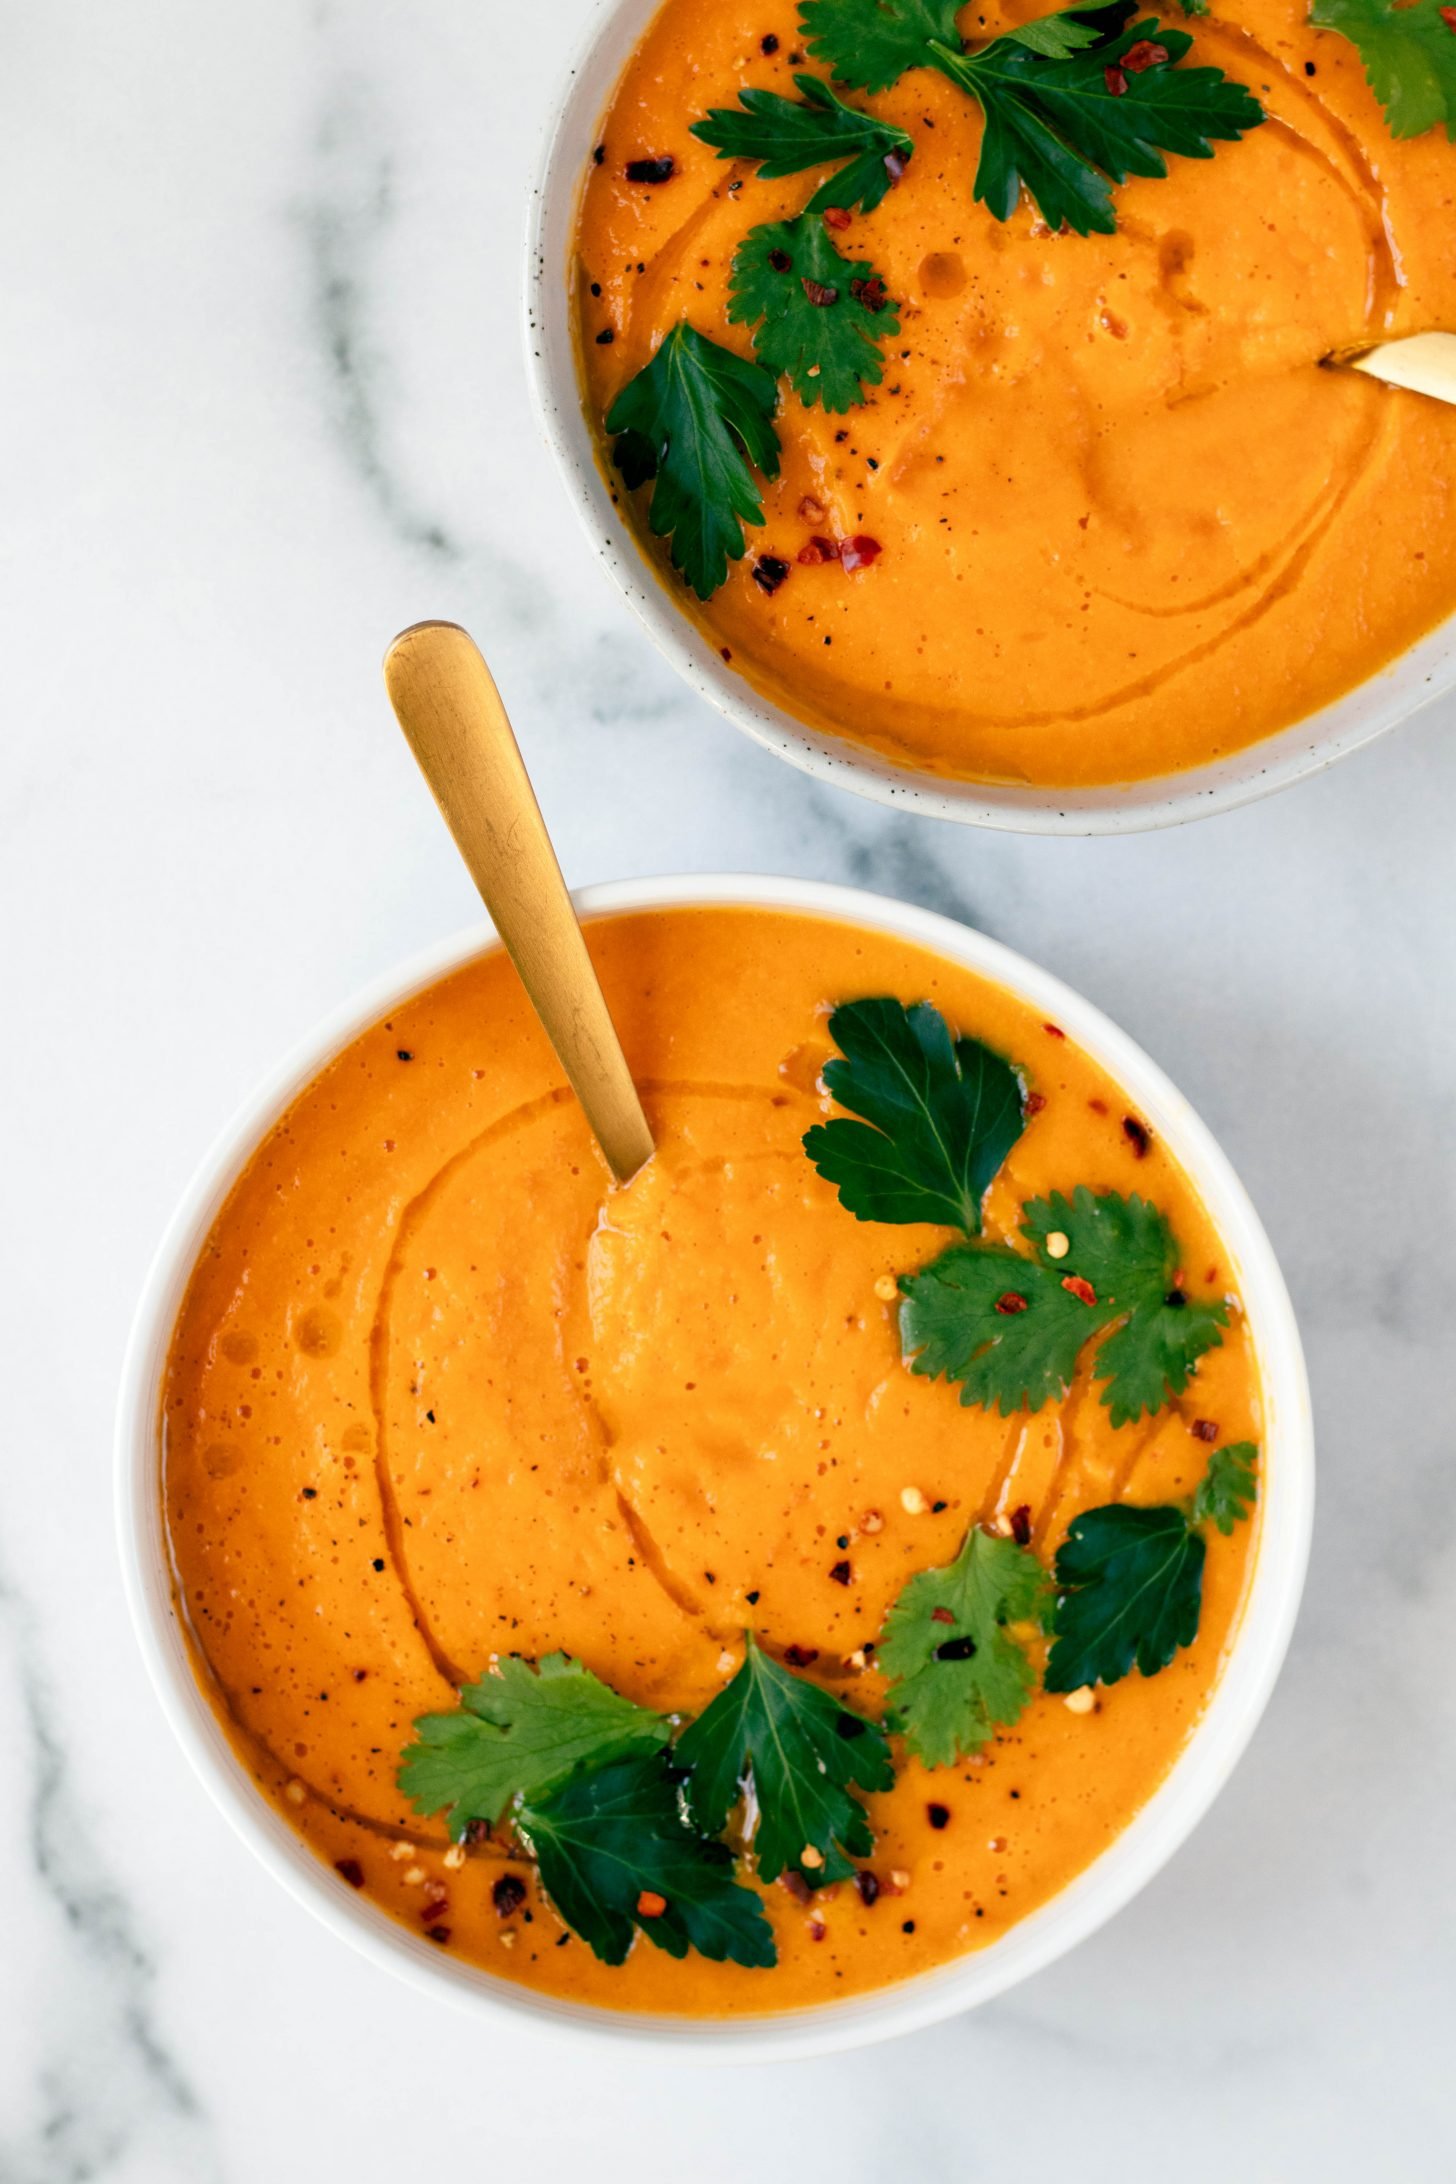 Two bowls of carrot ginger soup topped with cilantro leaves